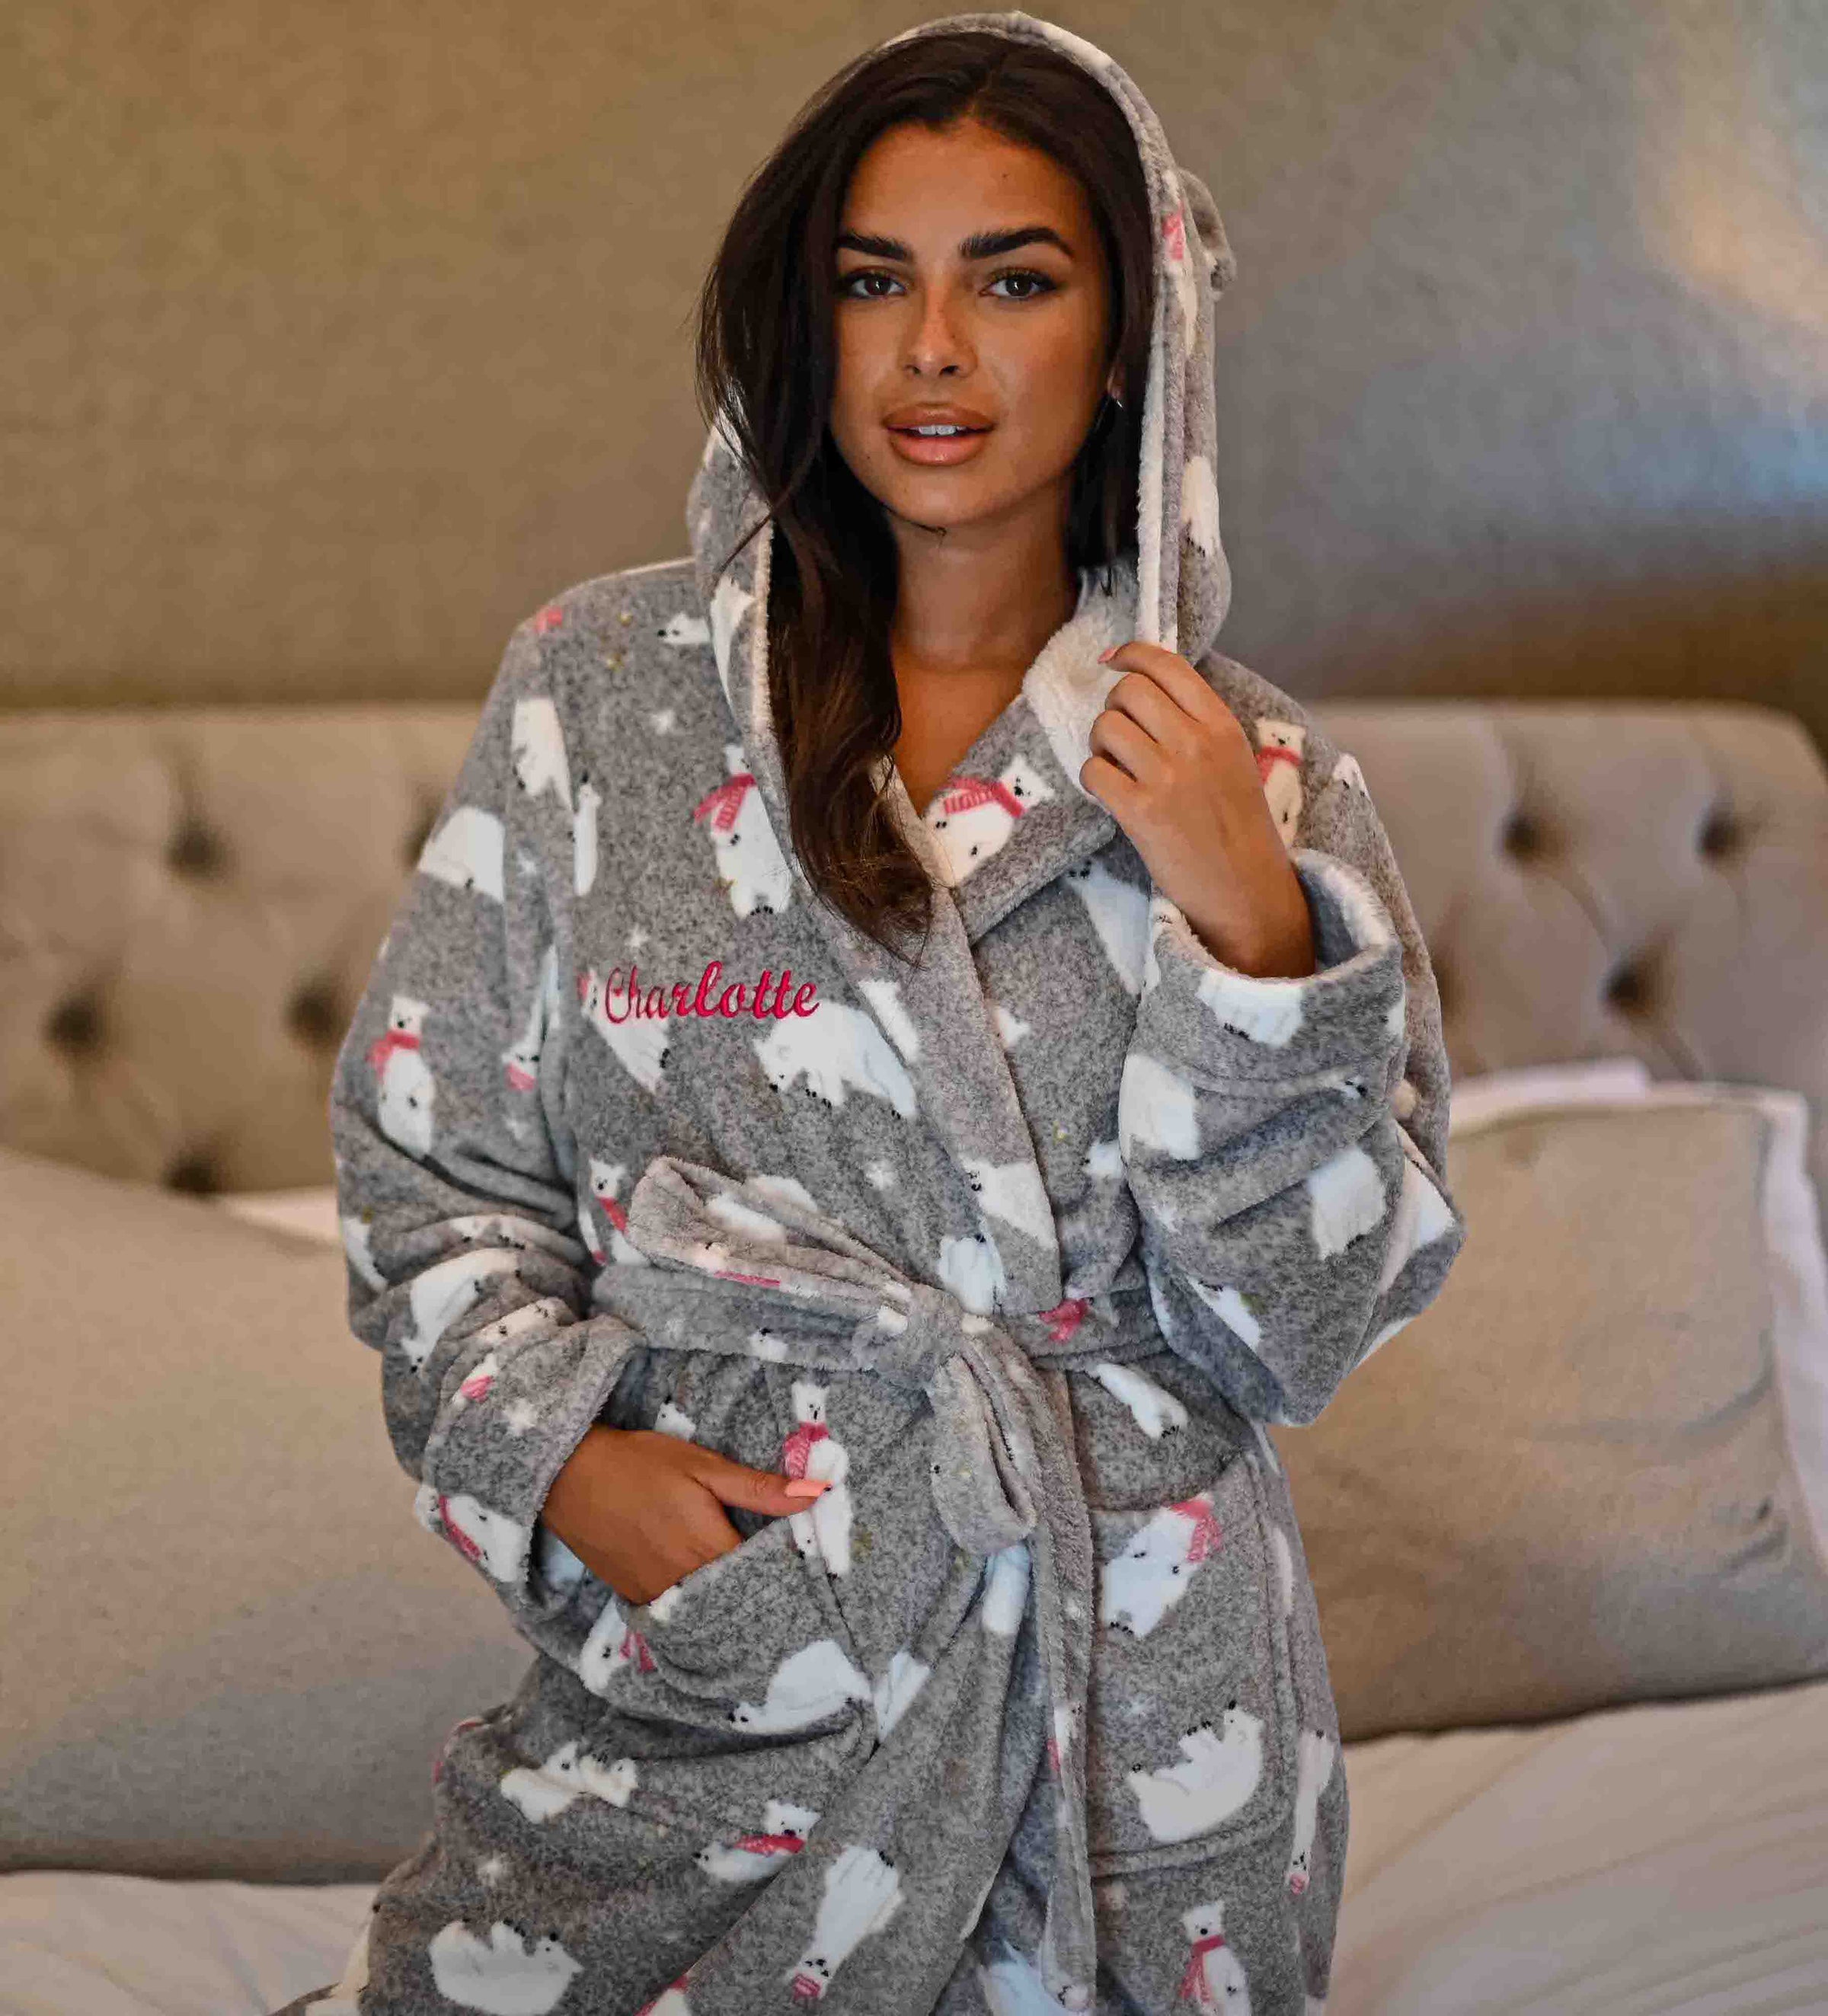 Loungeable Off White Metallic Star Fleece Hooded Dressing Gown | New Look